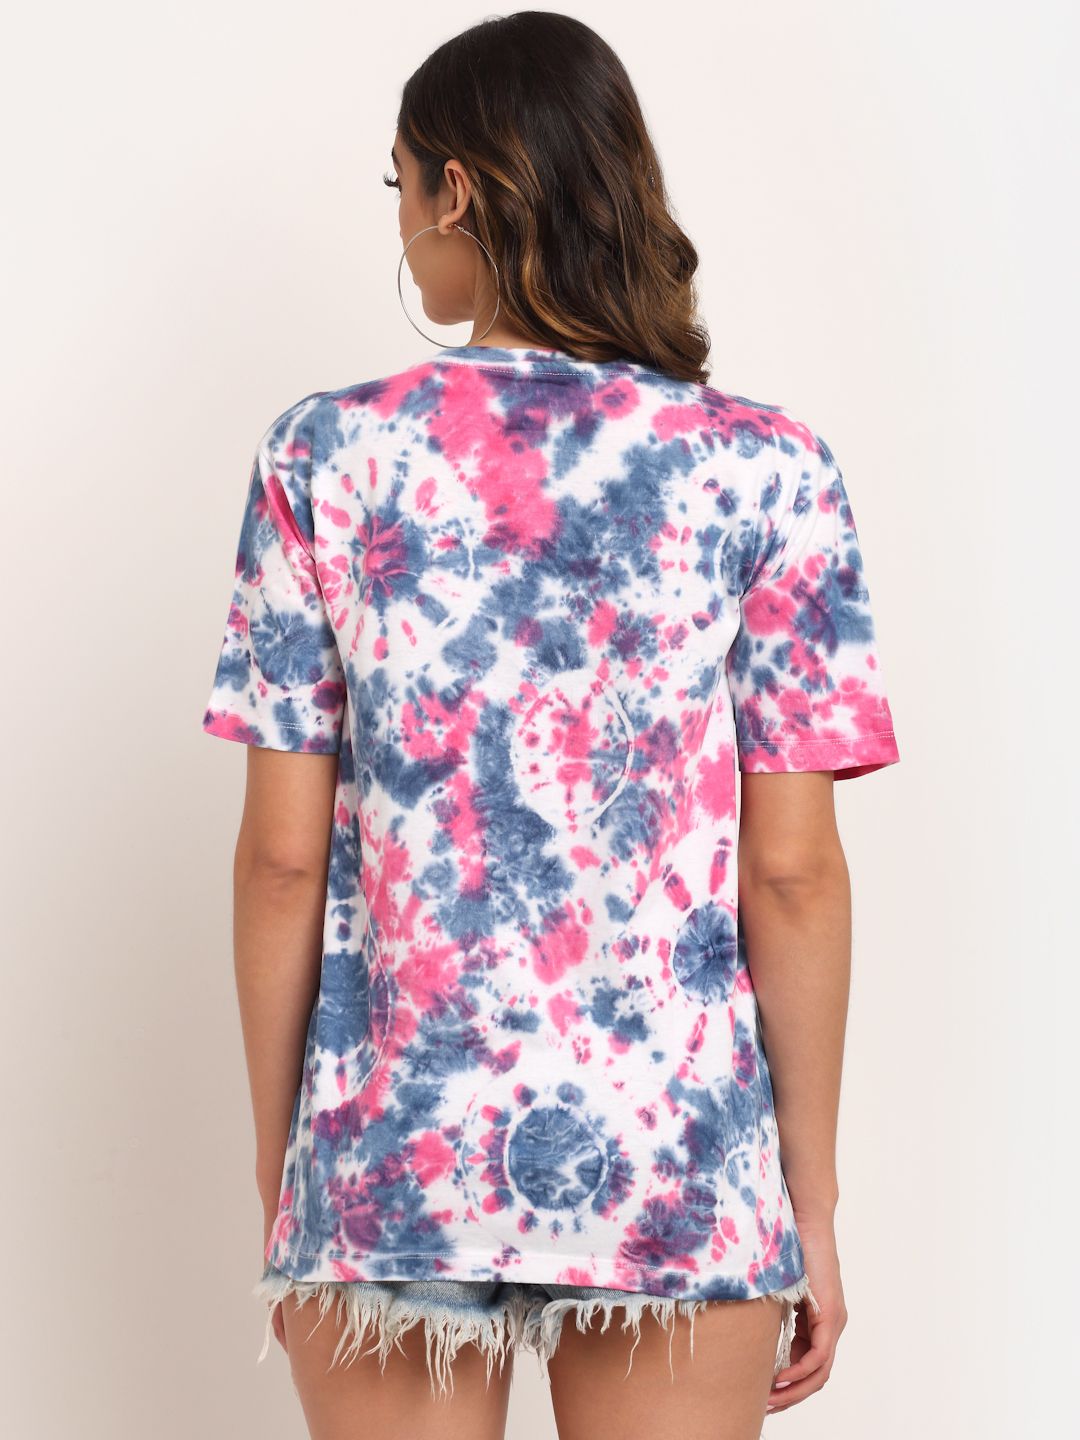 Patchy Pattern, Women Combed Cotton Tie dye multicoloured T-Shirt